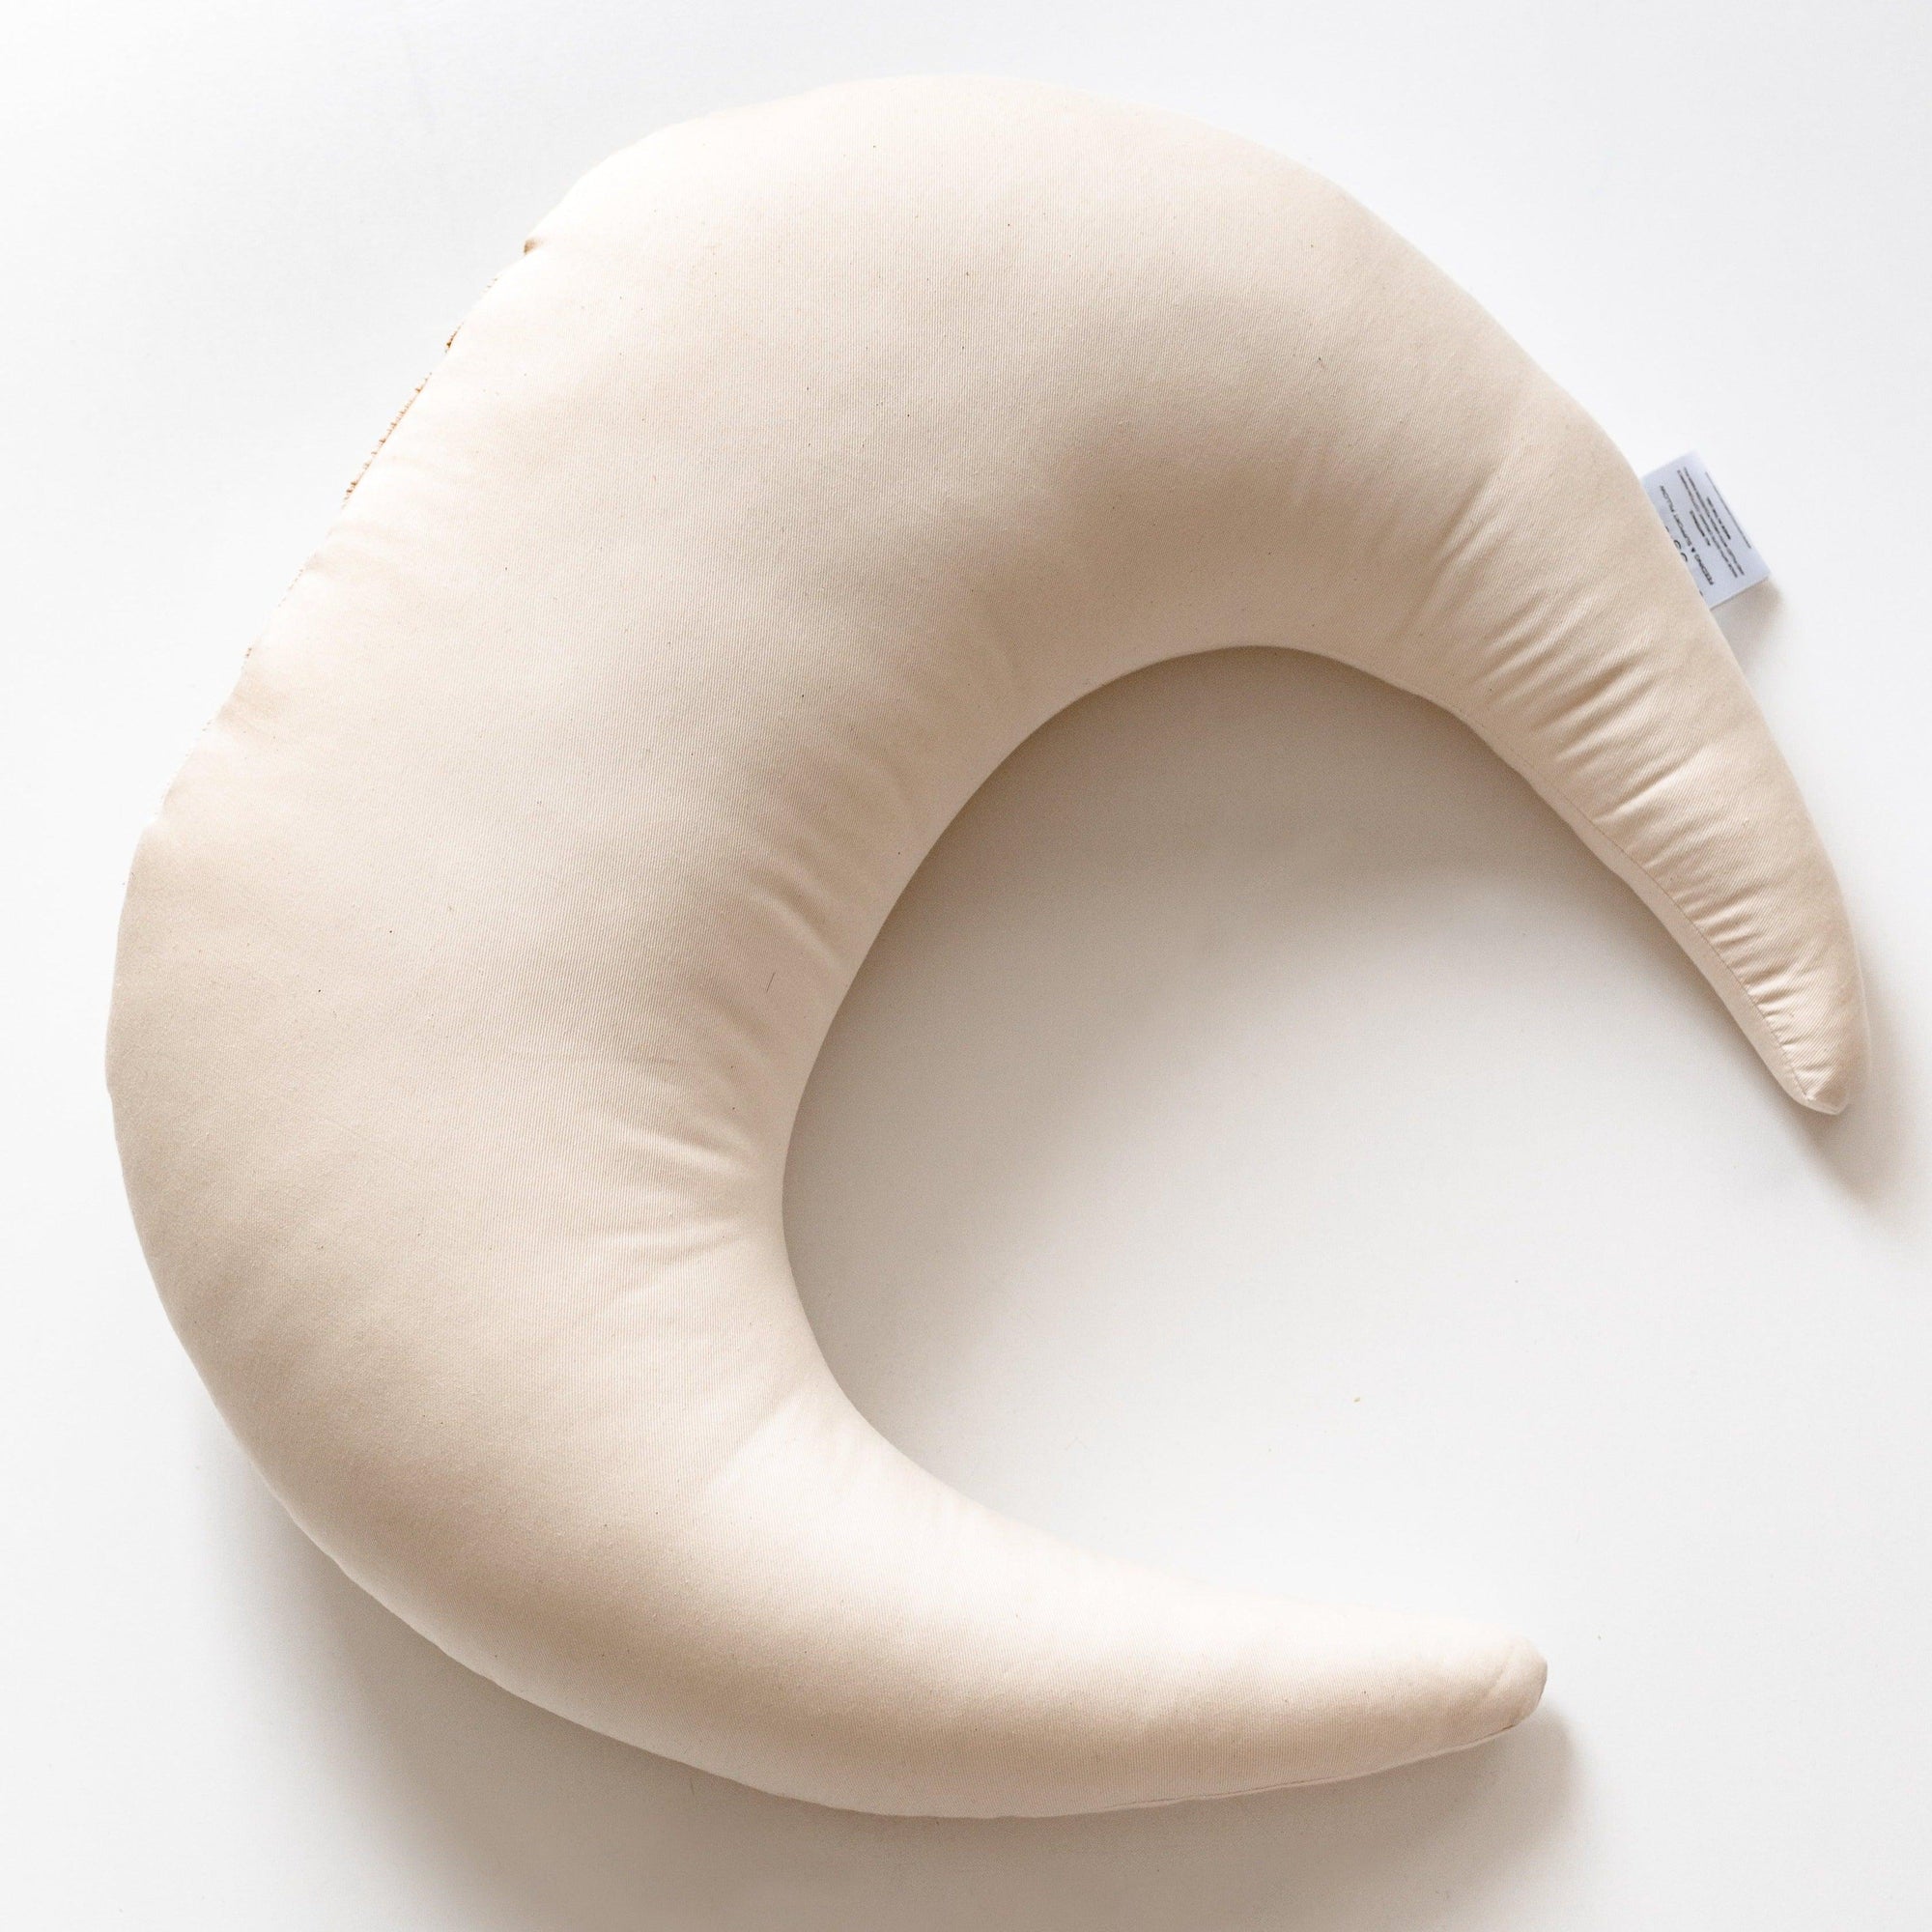 A crescent shaped Snuggle Me Feeding & Support Pillow | Natural on a white surface.